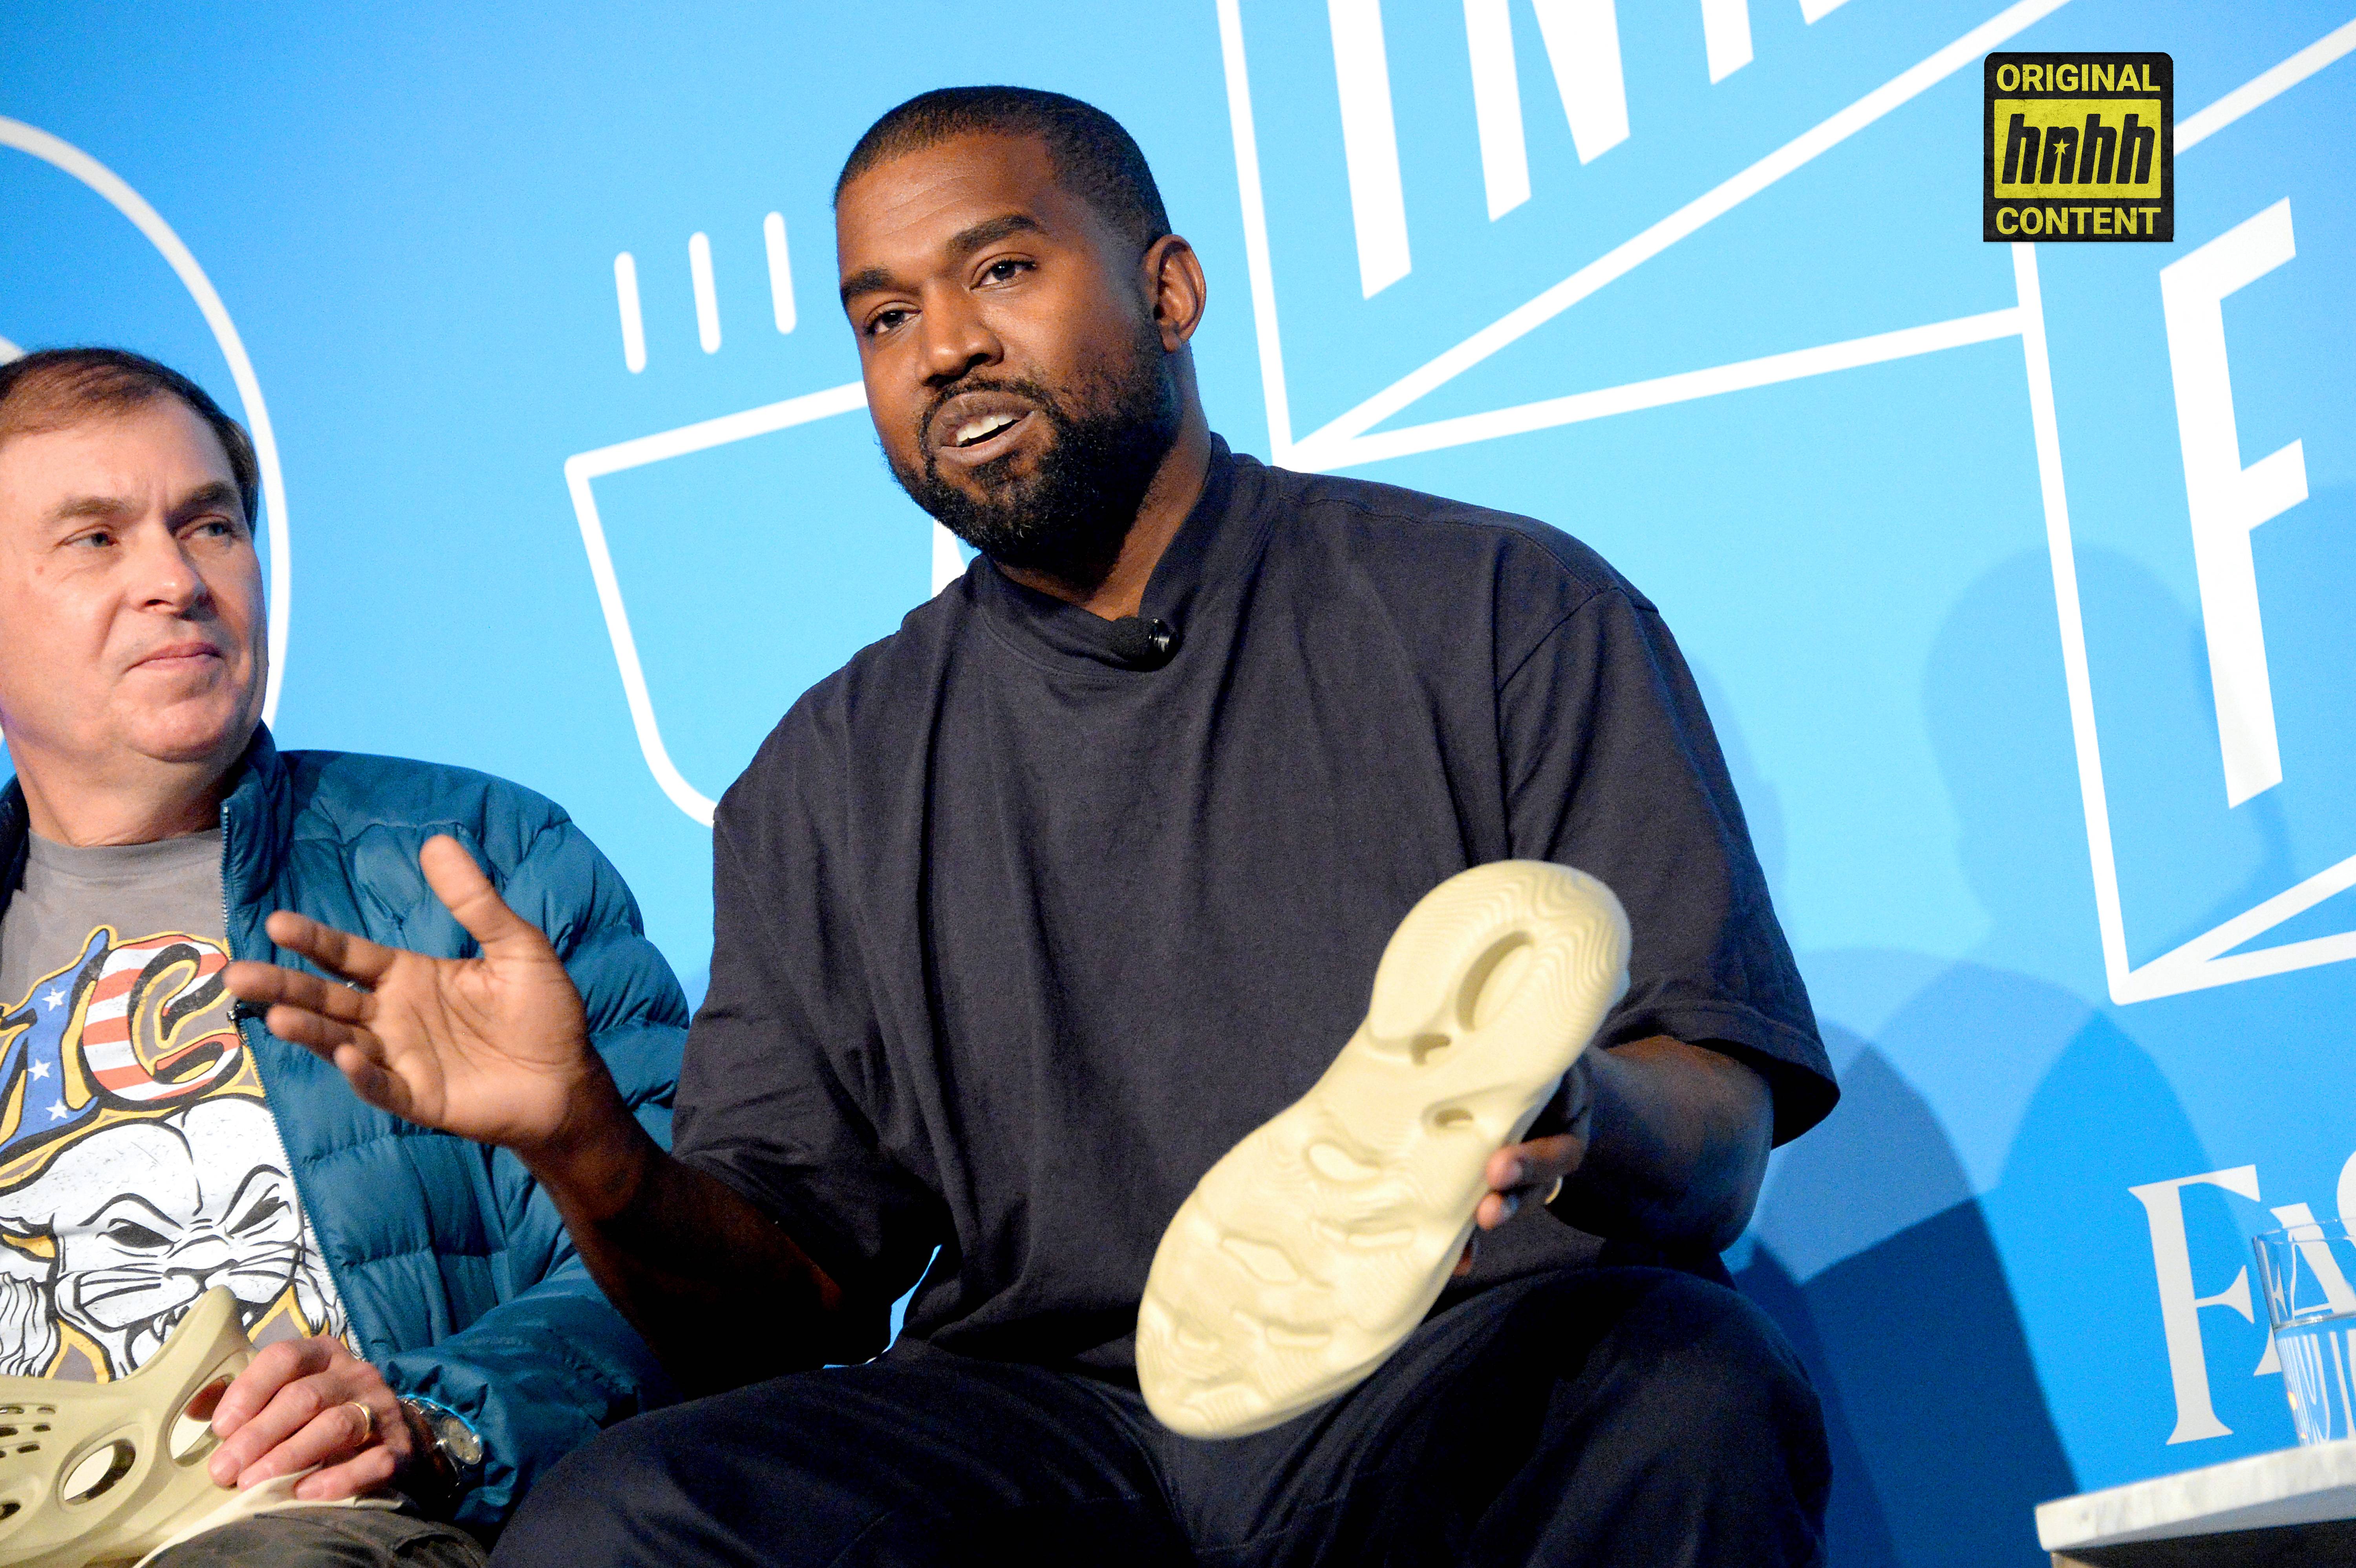 IetpShops  Kanye West and adidas Yeezy will be releasing a brand